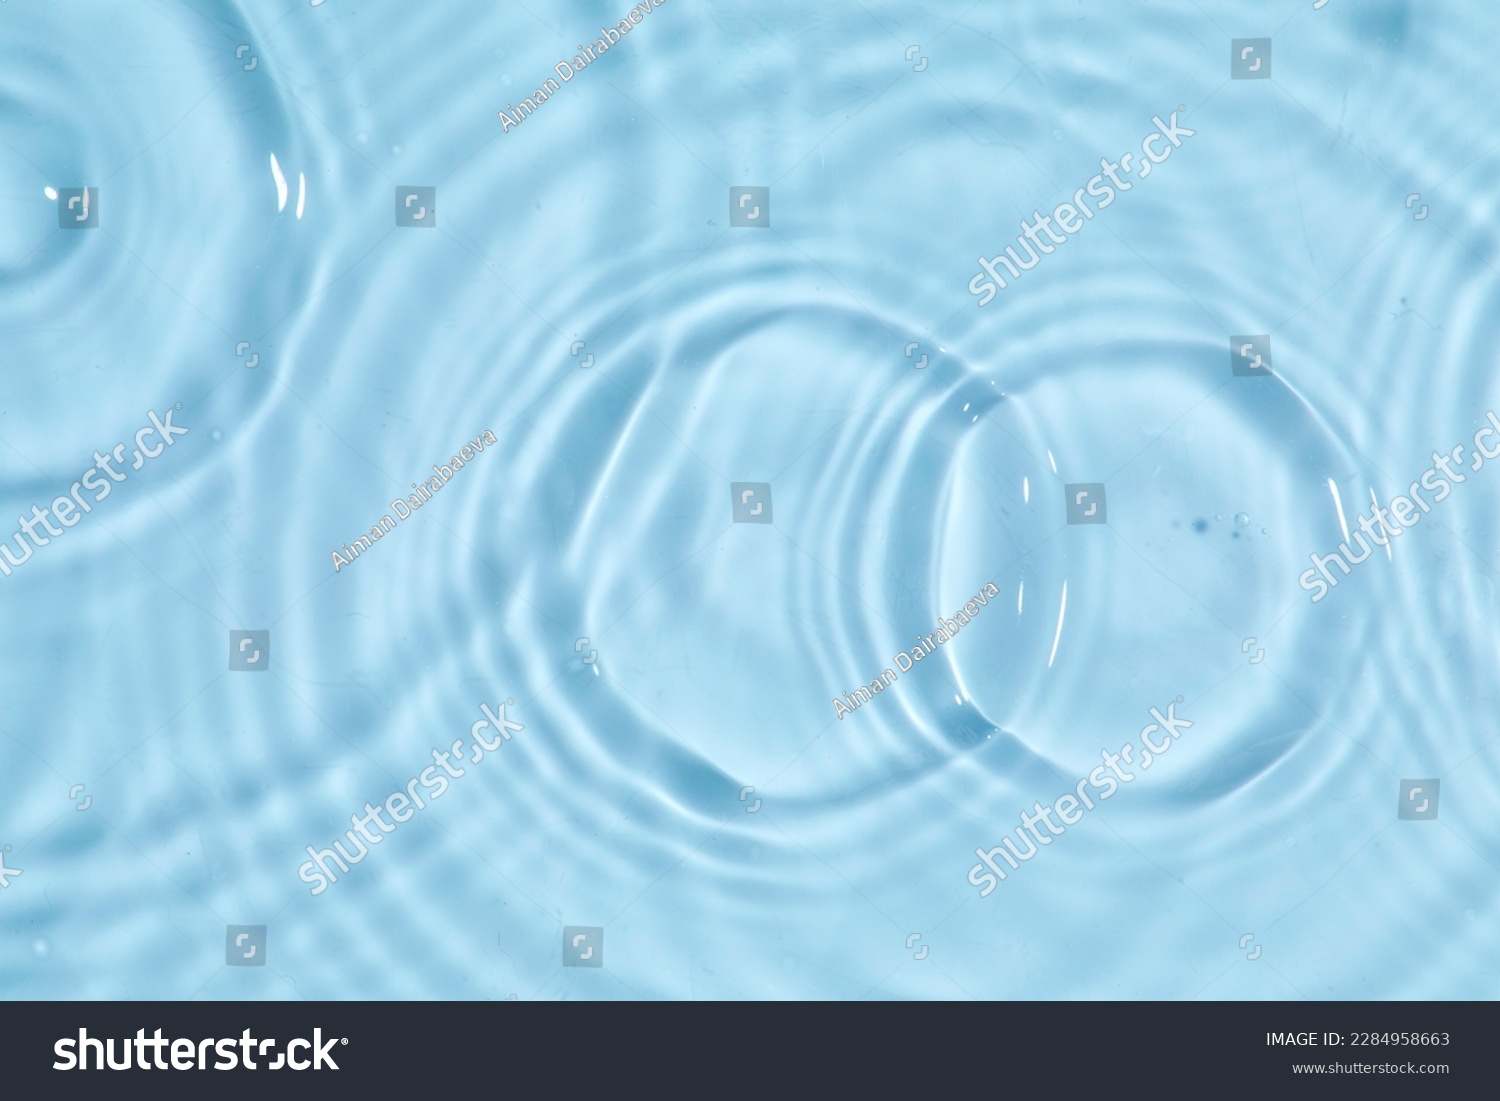 Blue water texture, blue water surface with rings and ripples. Spa concept background. Flat lay #2284958663